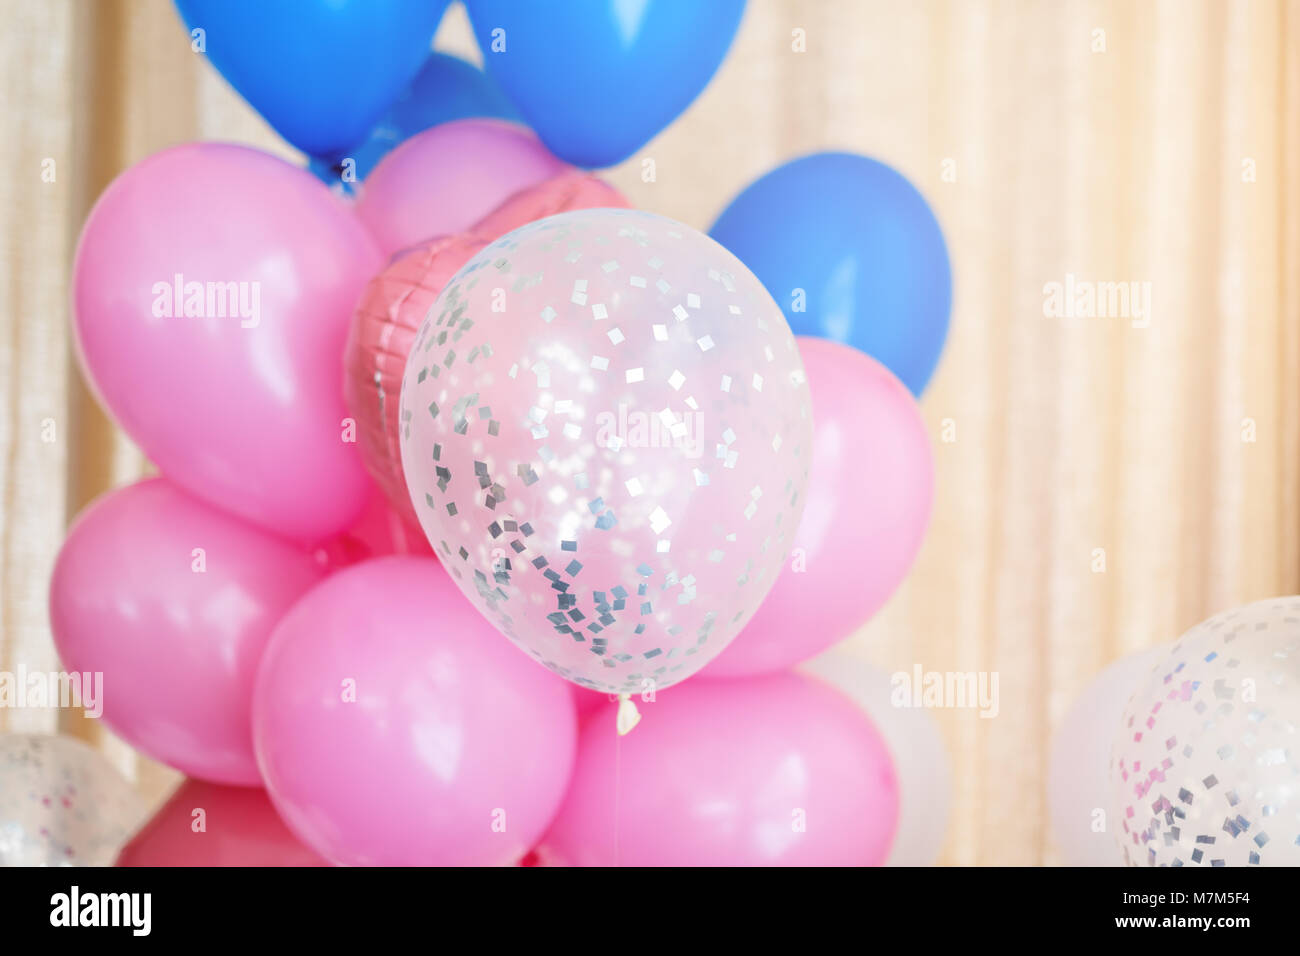 Pink, blue and white inflatable balloons. Decorations for birthday party Stock Photo